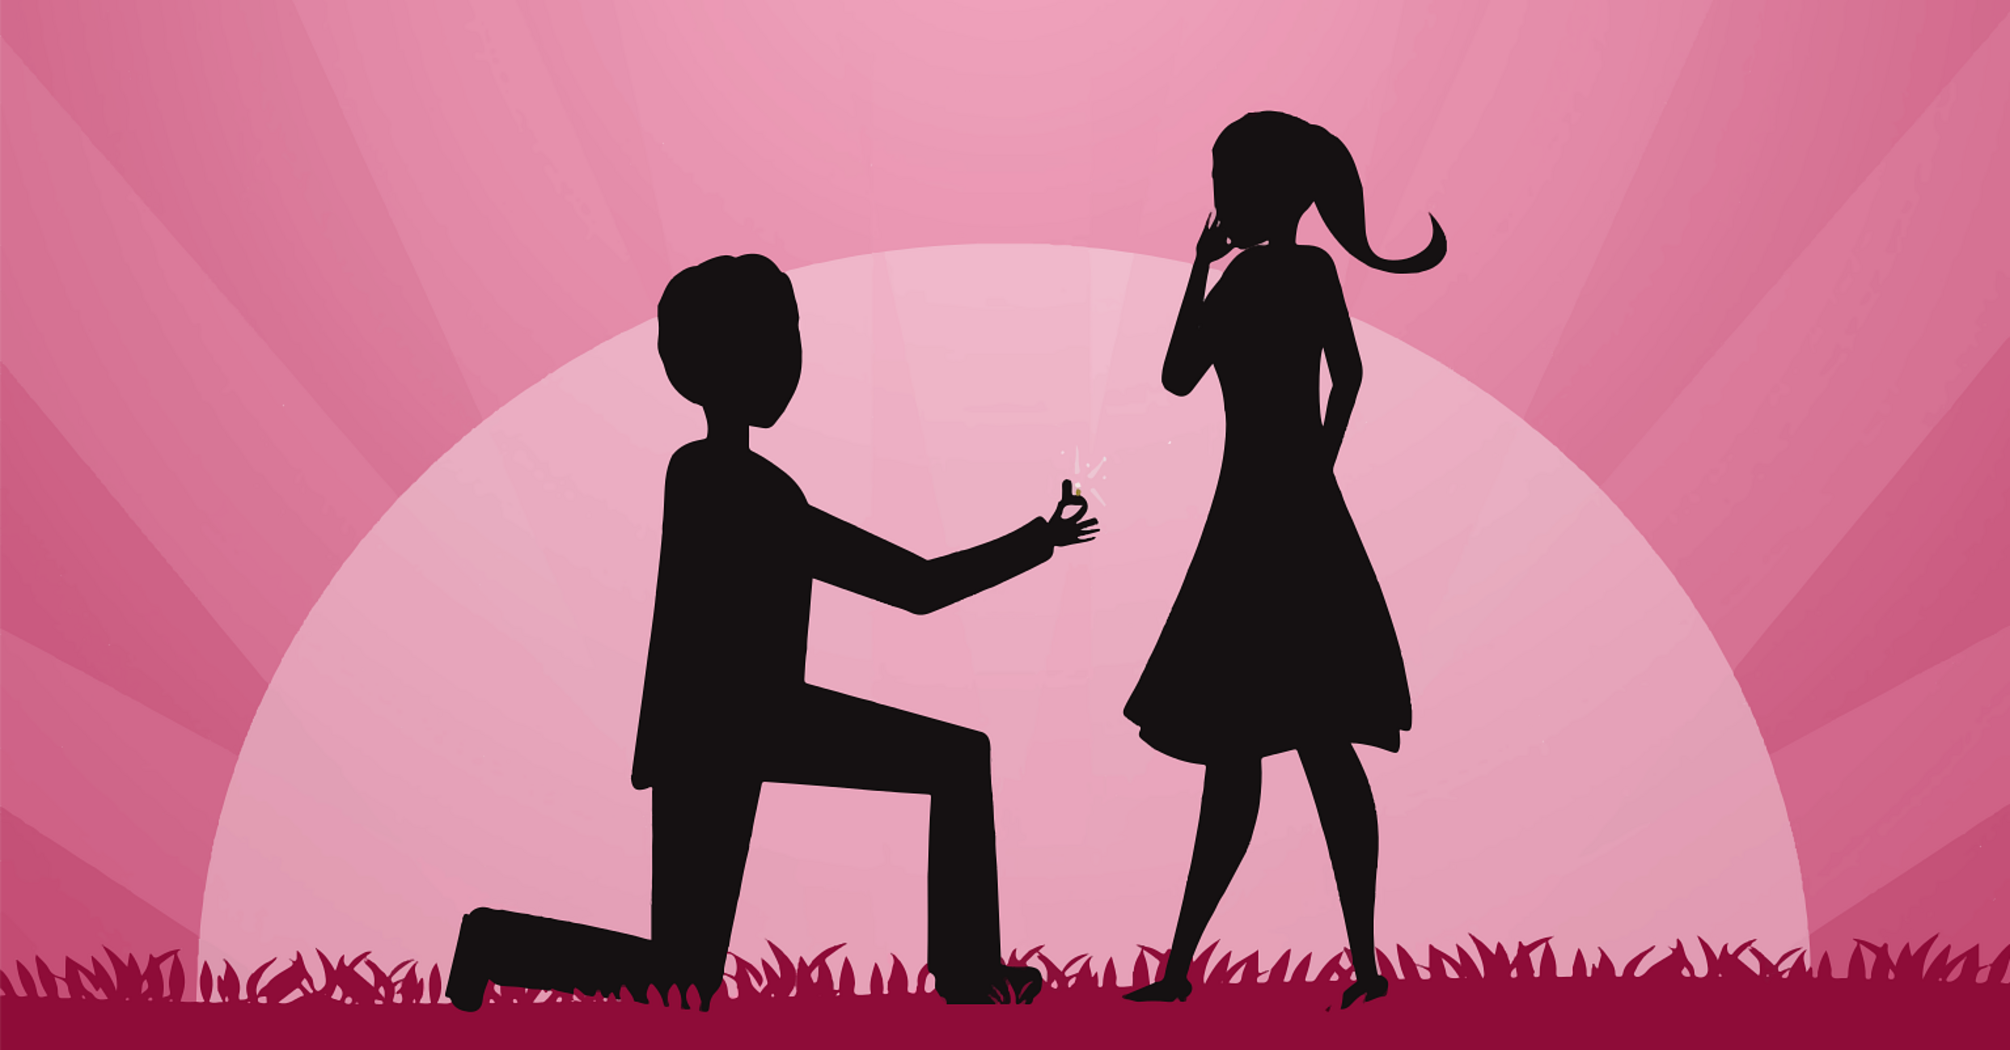 The silhouette of a person, kneeling and offering a ring to a woman